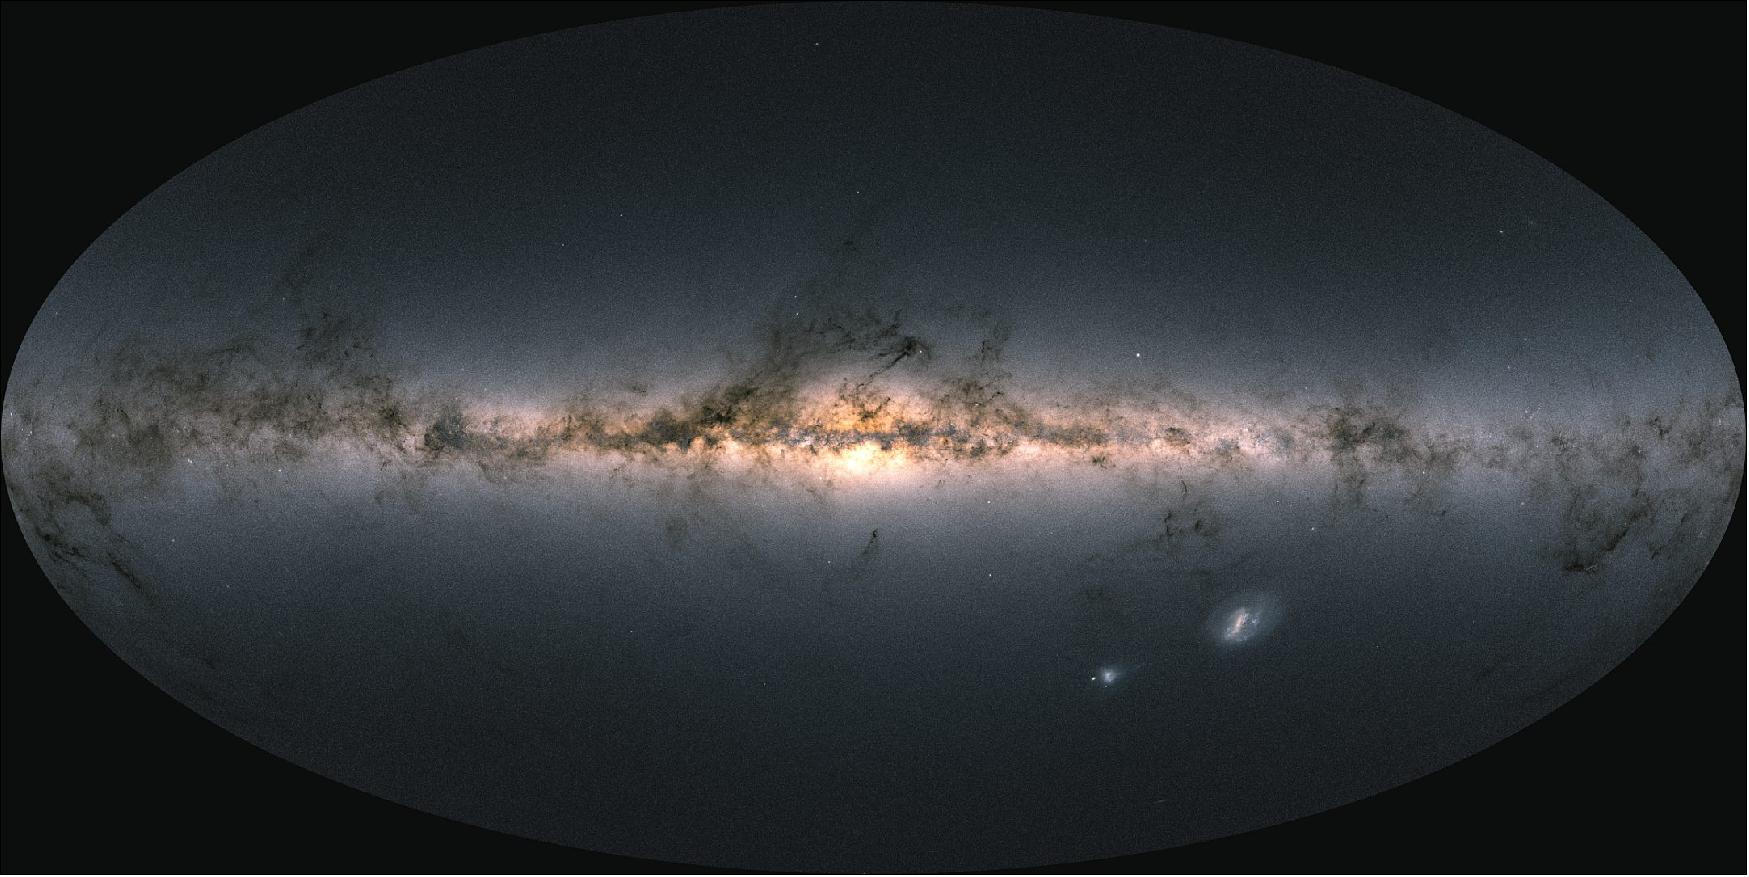 Figure 53: The color of the sky from Gaia’s Early Data Release 3. Data from more than 1.8 billion stars have been used to create this map of the entire sky. It shows the total brightness and color of stars observed by ESA’s Gaia satellite and released as part of Gaia’s EDR3. - Brighter regions represent denser concentrations of bright stars, while darker regions correspond to patches of the sky where fewer and fainter stars are observed. The color of the image is obtained by combining the total amount of light with the amount of blue and red light recorded by Gaia in each patch of the sky. - The bright horizontal structure that dominates the image is the plane of our Milky Way galaxy. It is actually a flattened disc seen edge-on that contains most of the galaxy’s stars. In the middle of the image, the Galactic center appears bright, and thronged with stars. - Darker regions across the Galactic plane correspond to foreground clouds of interstellar gas and dust, which absorb the light of more distant stars. Many of these clouds conceal stellar nurseries where new generations of stars are currently being born. - Dotted across the image are also many globular and open clusters, as well as entire galaxies beyond our own. The two bright objects in the lower right of the image are the Large and Small Magellanic Clouds, two dwarf galaxies orbiting the Milky Way. - Gaia EDR3 was made public on 3 December 2020 and includes the position and brightness of more than 1.8 billion stars, the parallax and proper motion of almost 1.5 billion stars, and the color of more than 1.5 billion stars. It also includes more than 1.6 million extragalactic sources (image credit: ESA/Gaia/DPAC; CC BY-SA 3.0 IGO. Acknowledgement: A. Moitinho)